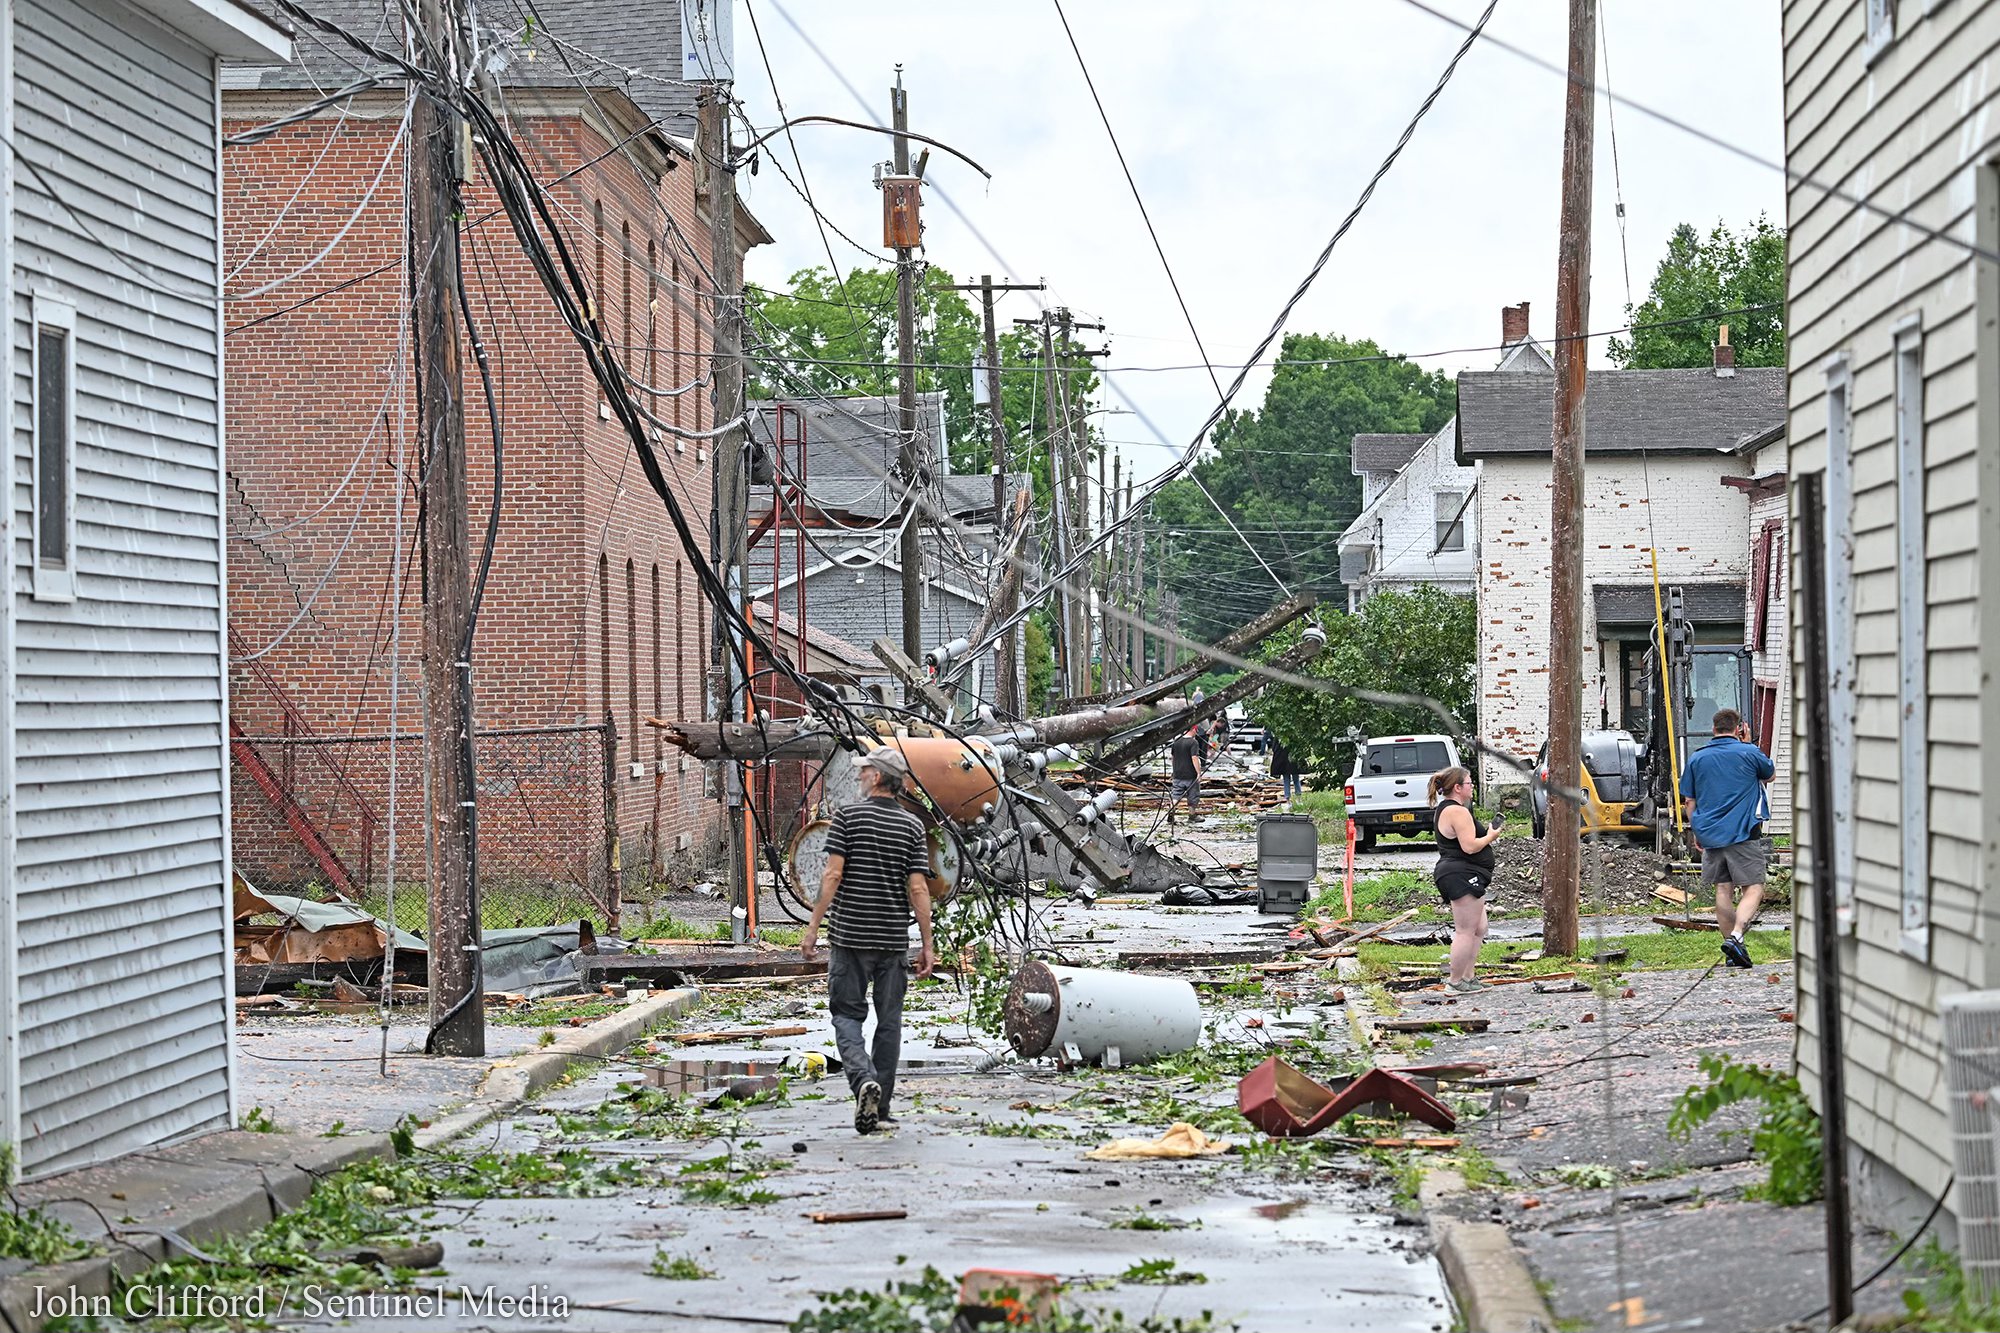 Rome, NY Emergency Response Fund Established to Support Recovery After July 16 Storm